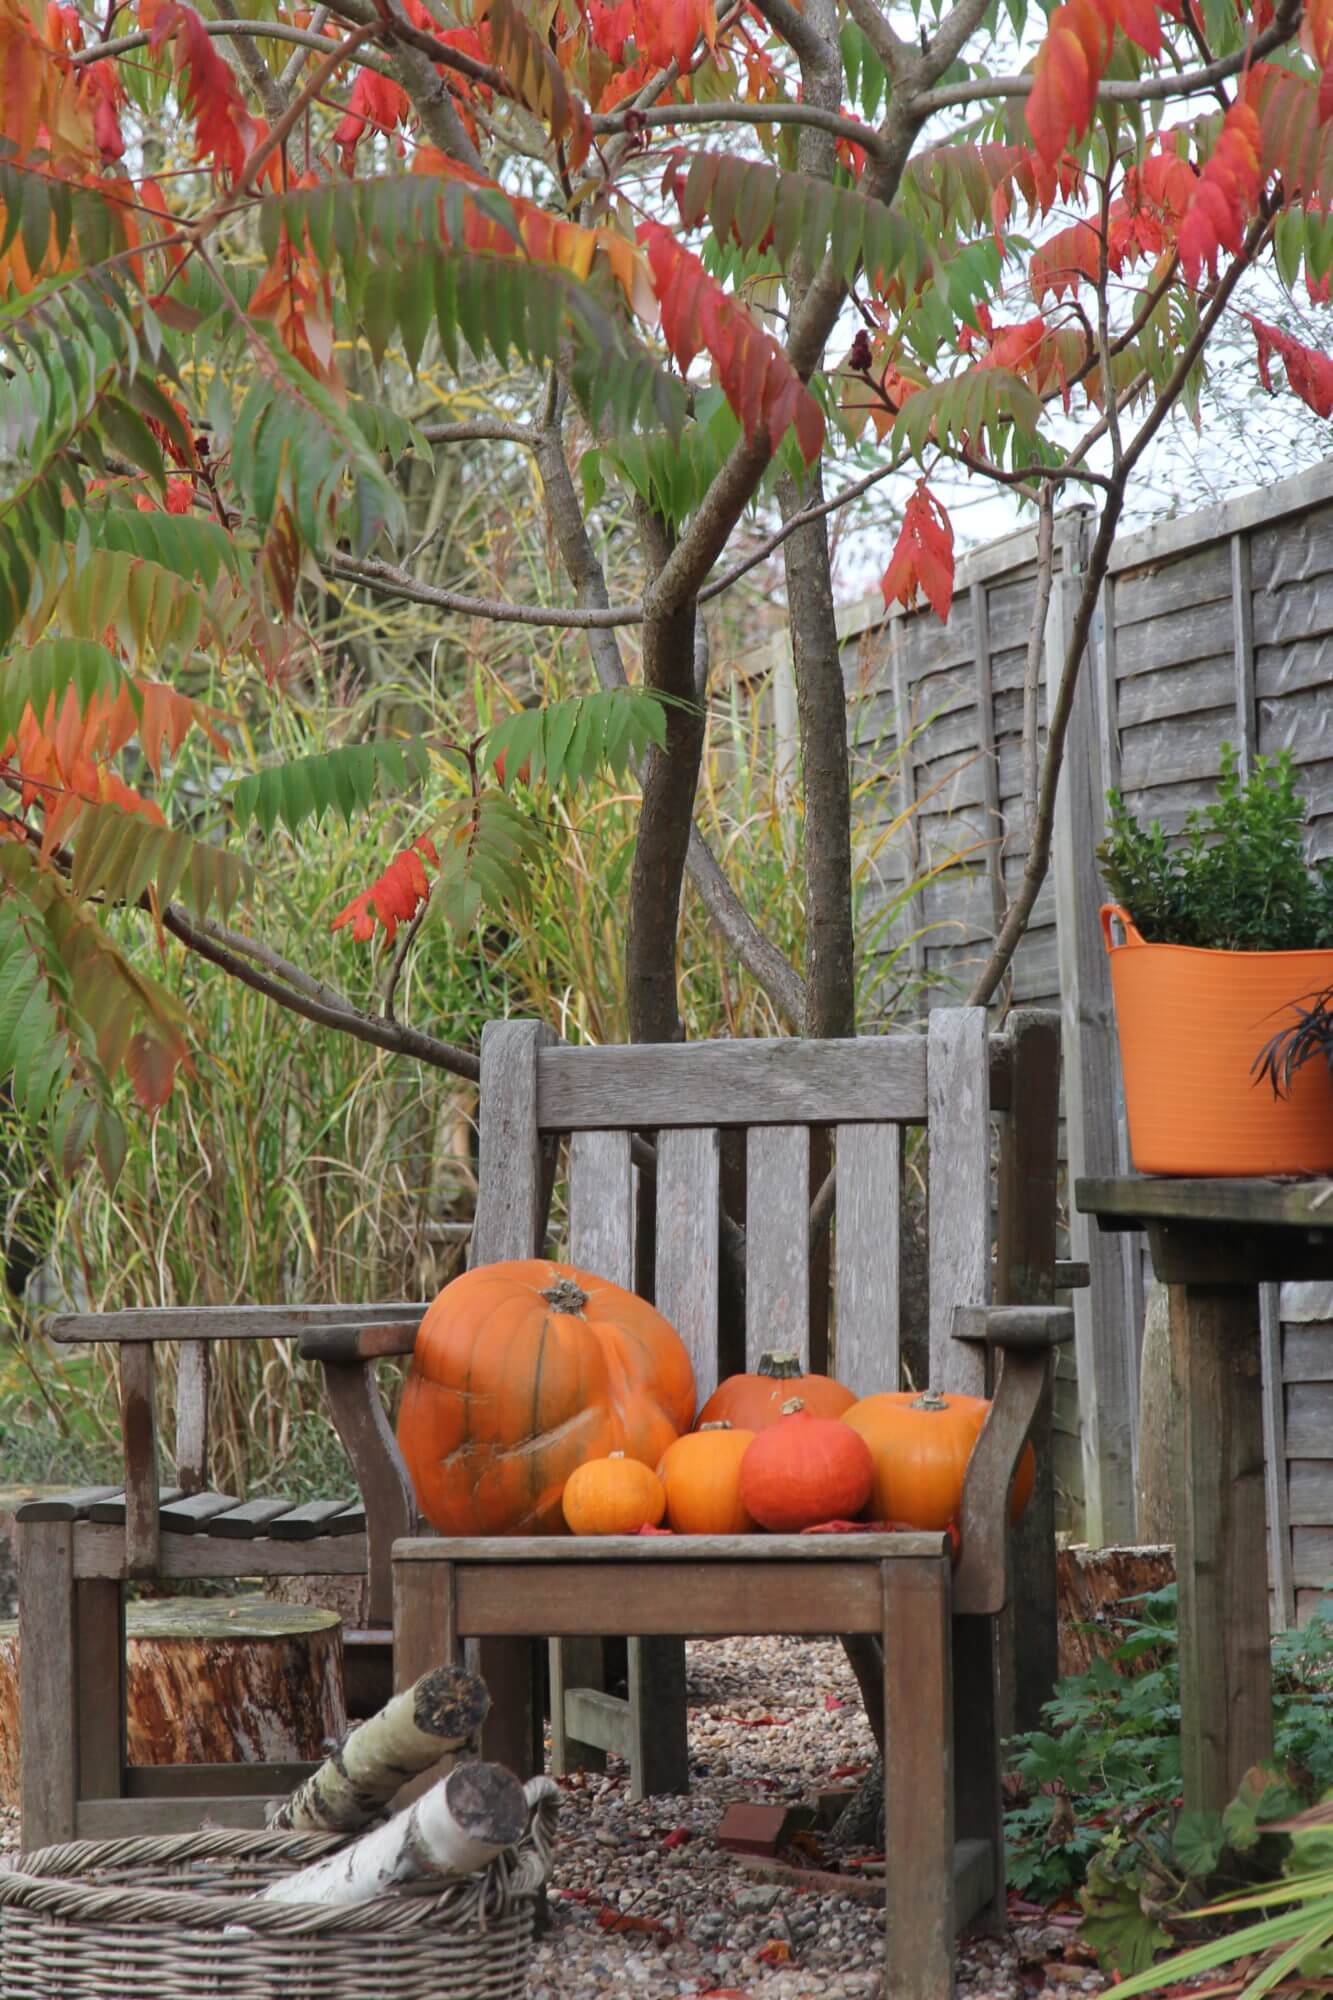 Orange pumpkins of various sizes on a wooden chair under a tree in autumn